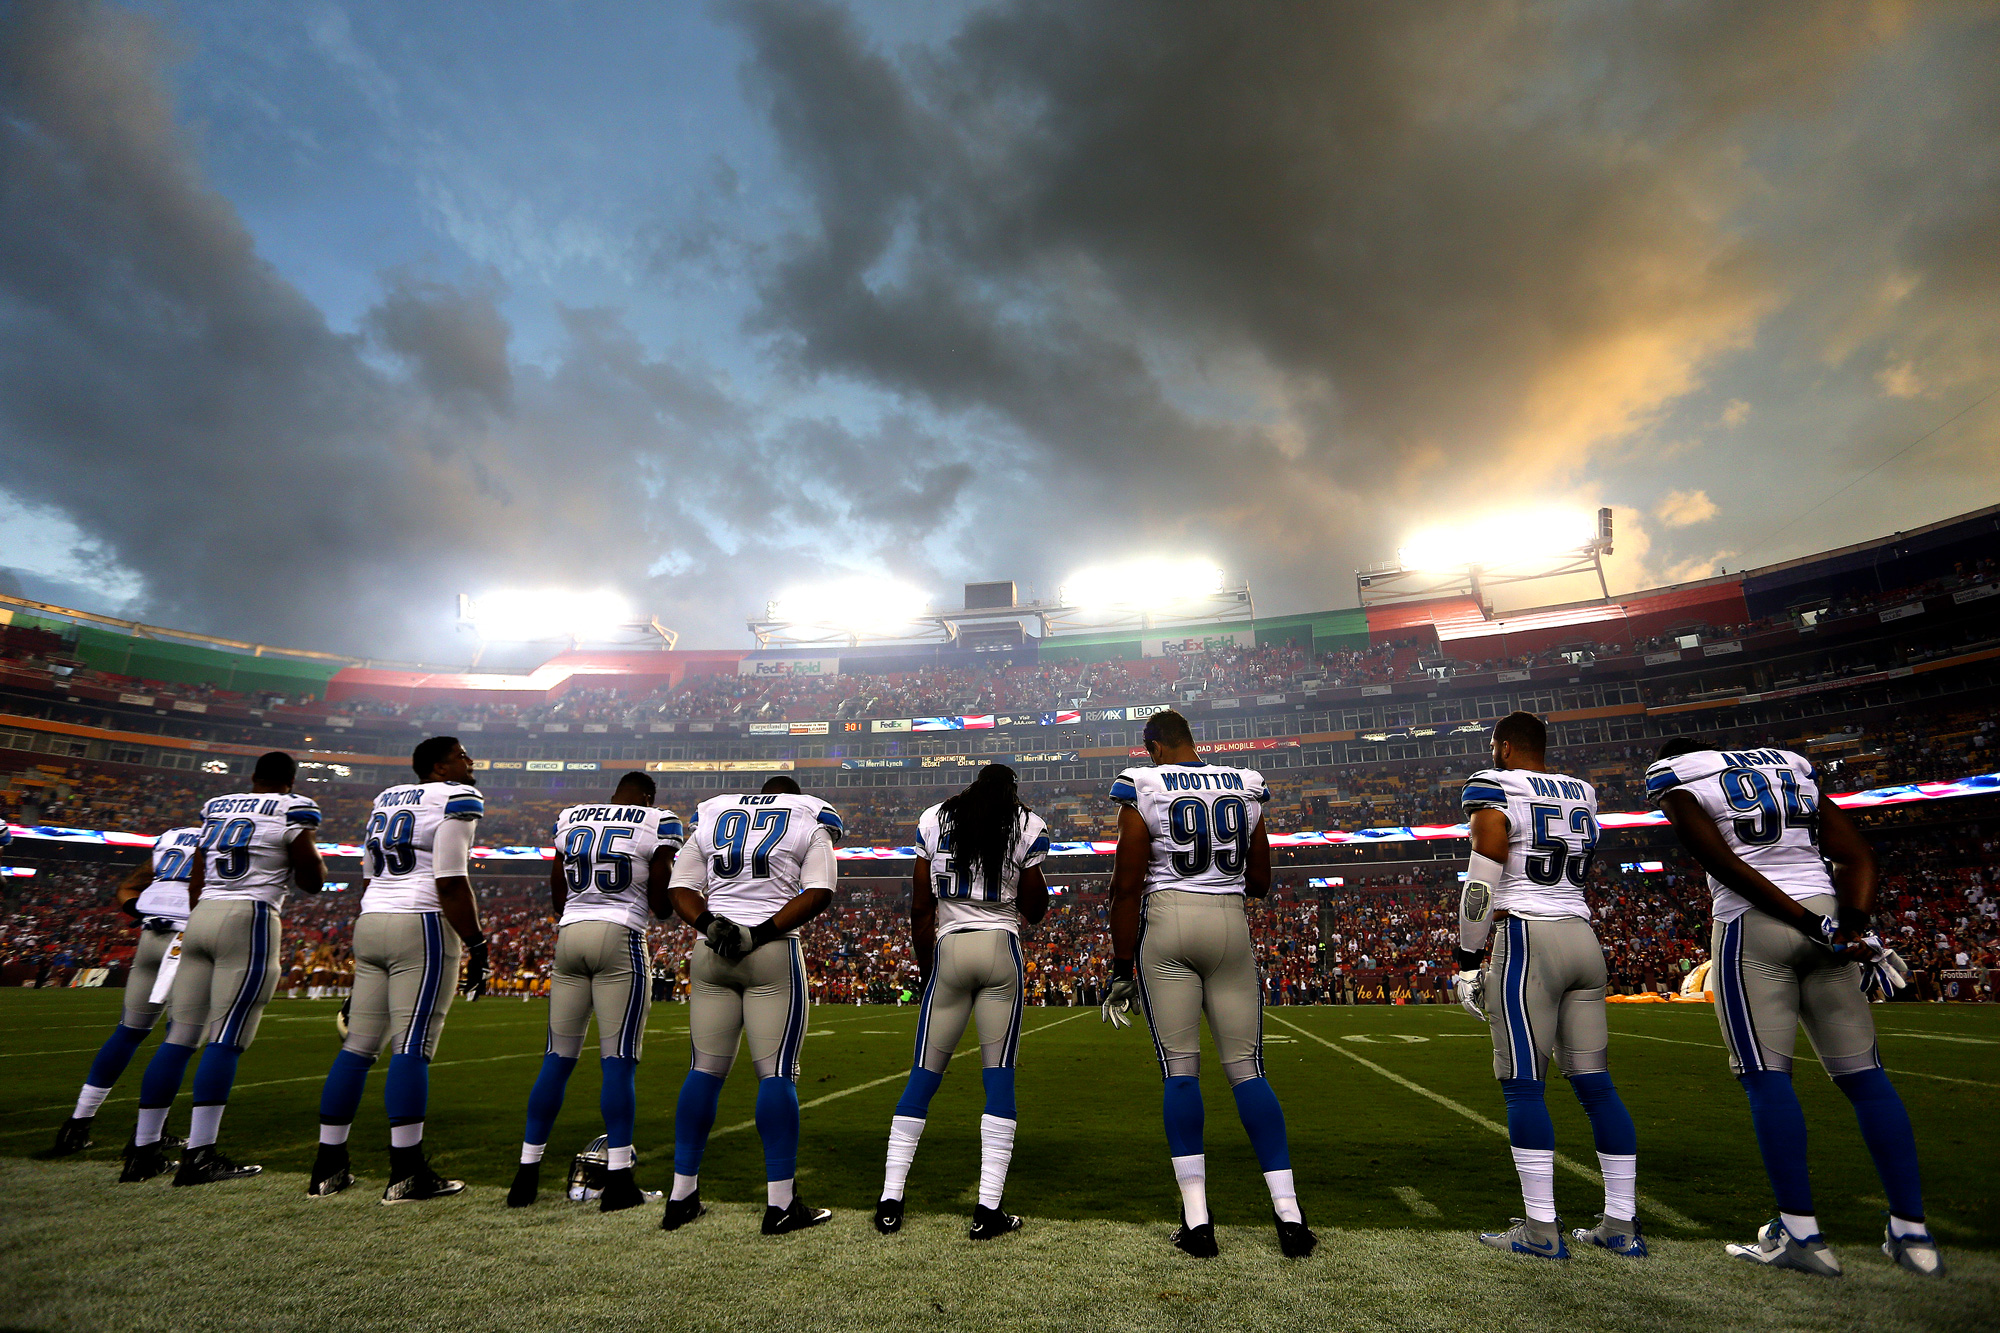  Members of the Detroit Lions stand for the playing of the national anthem before a preseason game against the Washington Redskins at FedEx Field on August 20, 2015 in Landover, Maryland. 